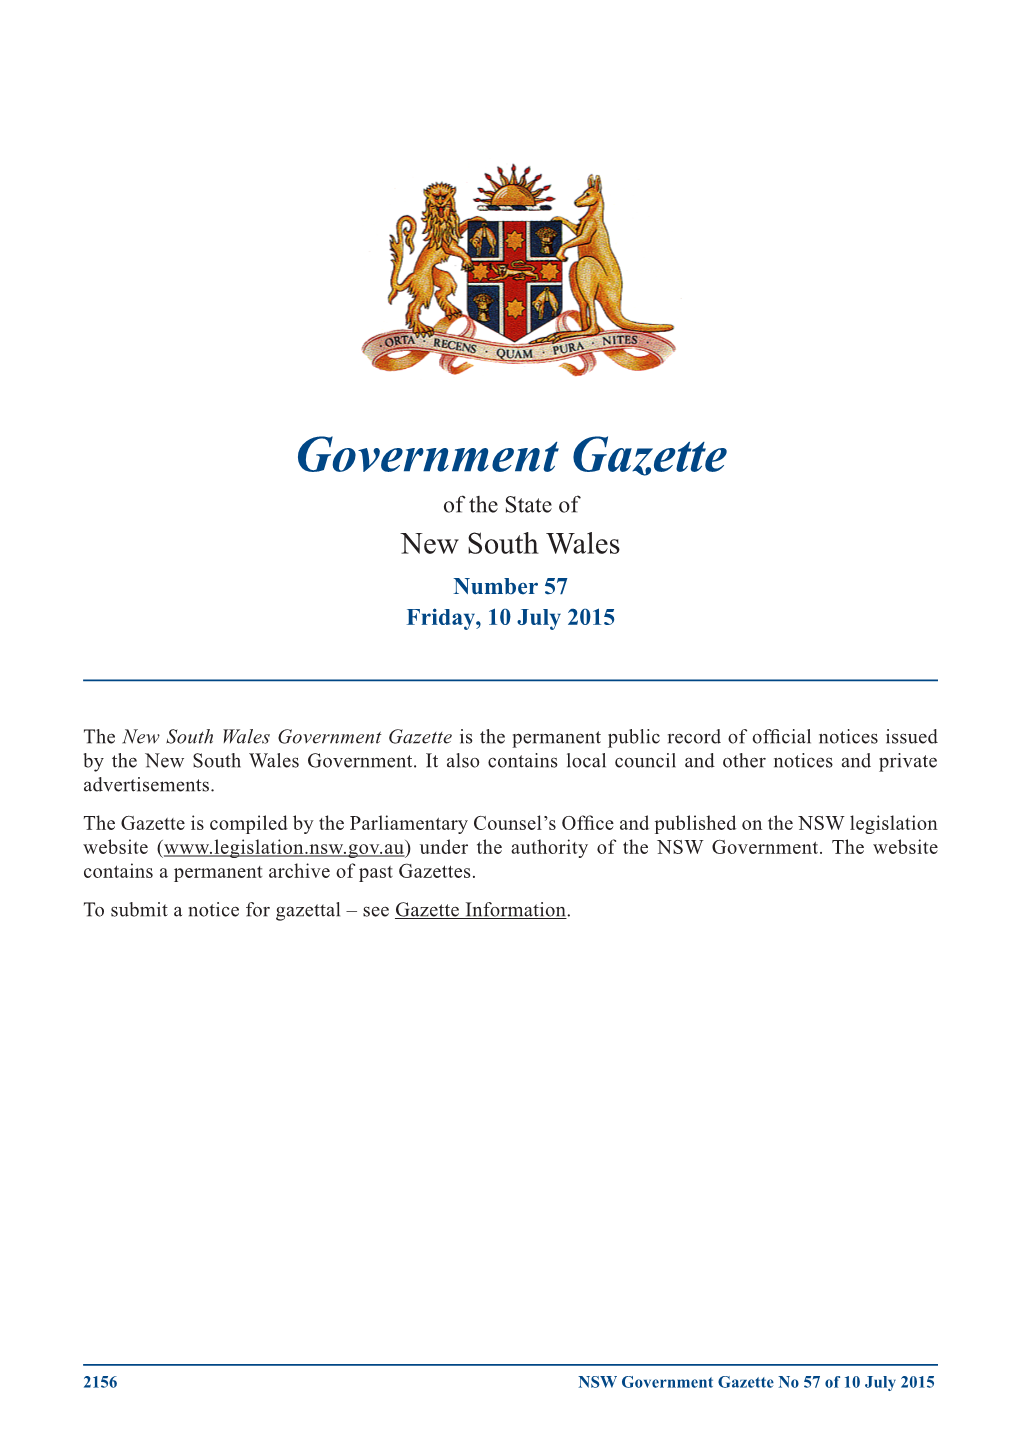 Government Gazette No 57 of 10 July 2015 Government Notices GOVERNMENT NOTICES Miscellaneous Instruments